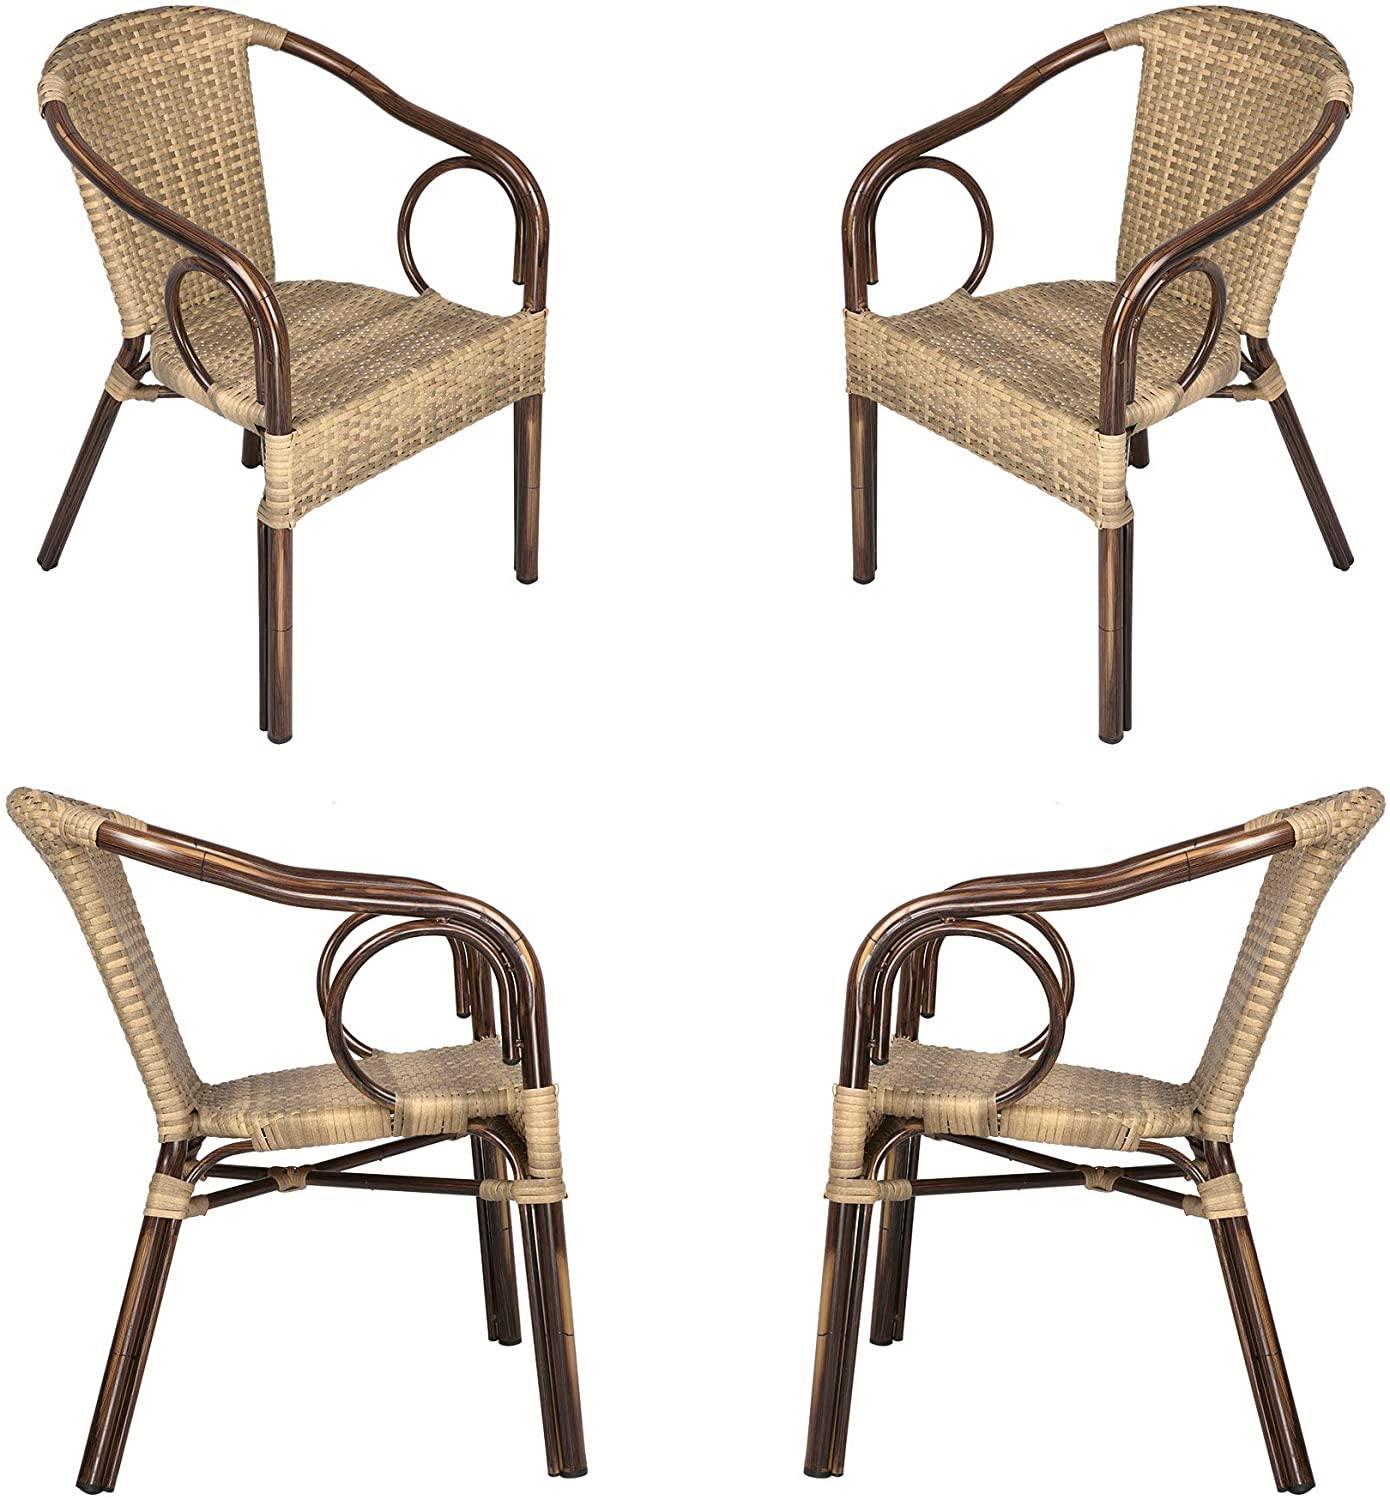 Outdoor Patio Dining Chairs, Handmade PE Rattan Wicker Armchair with Aluminum Alloy Frame, Set of 4, Brown and Beige - Bosonshop